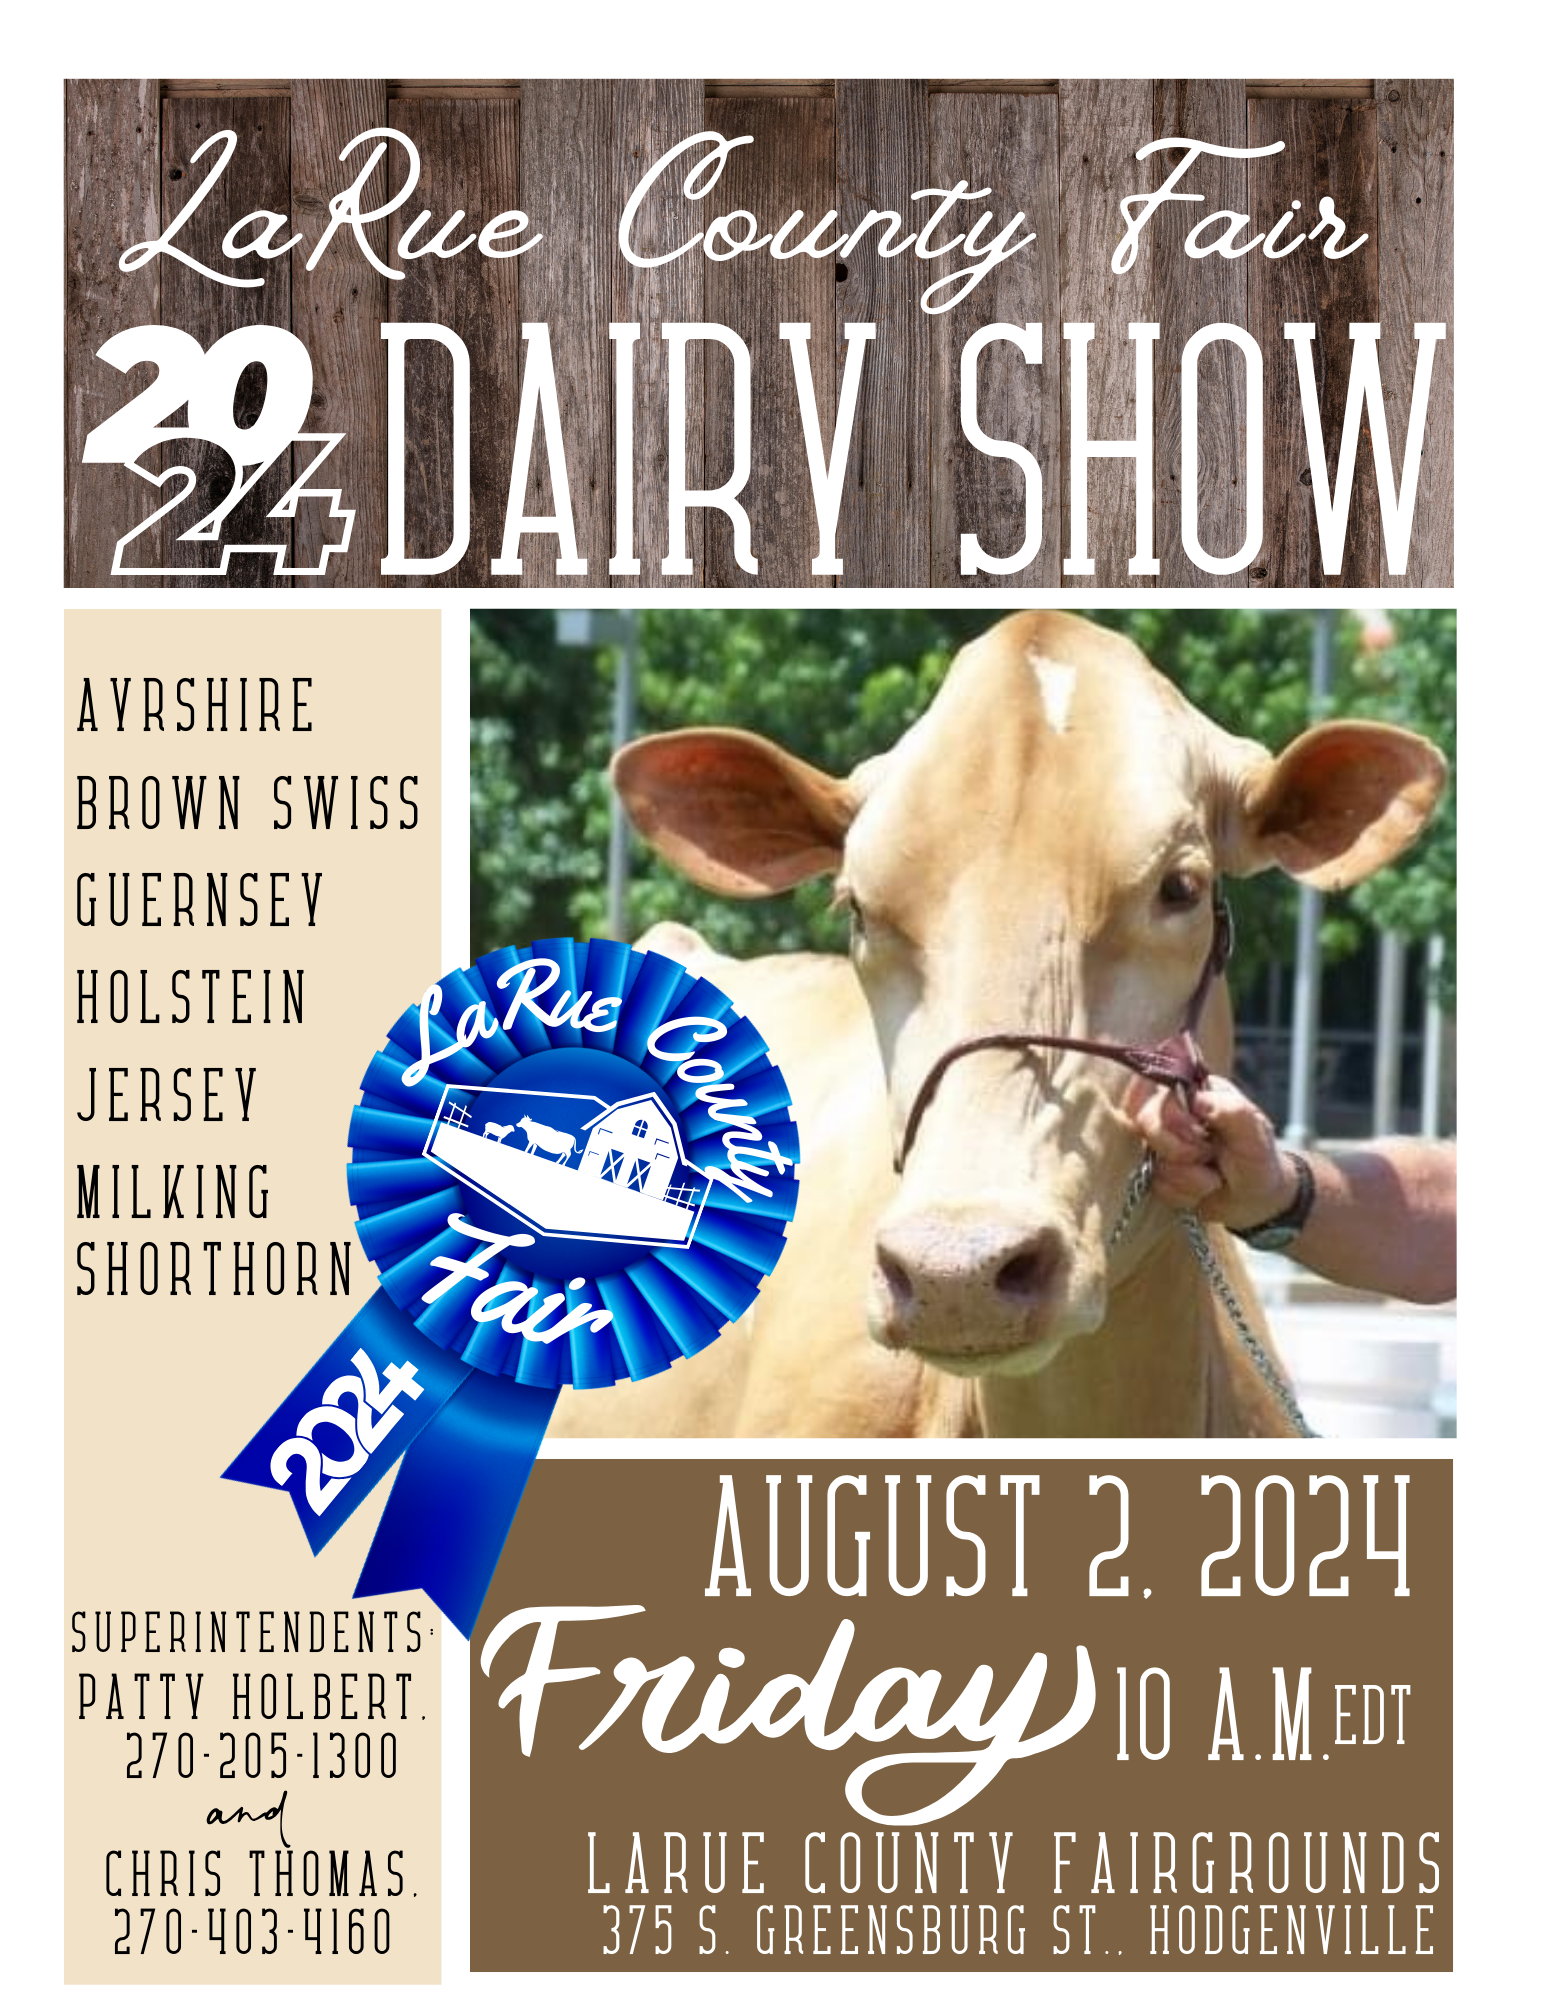 cow with show information